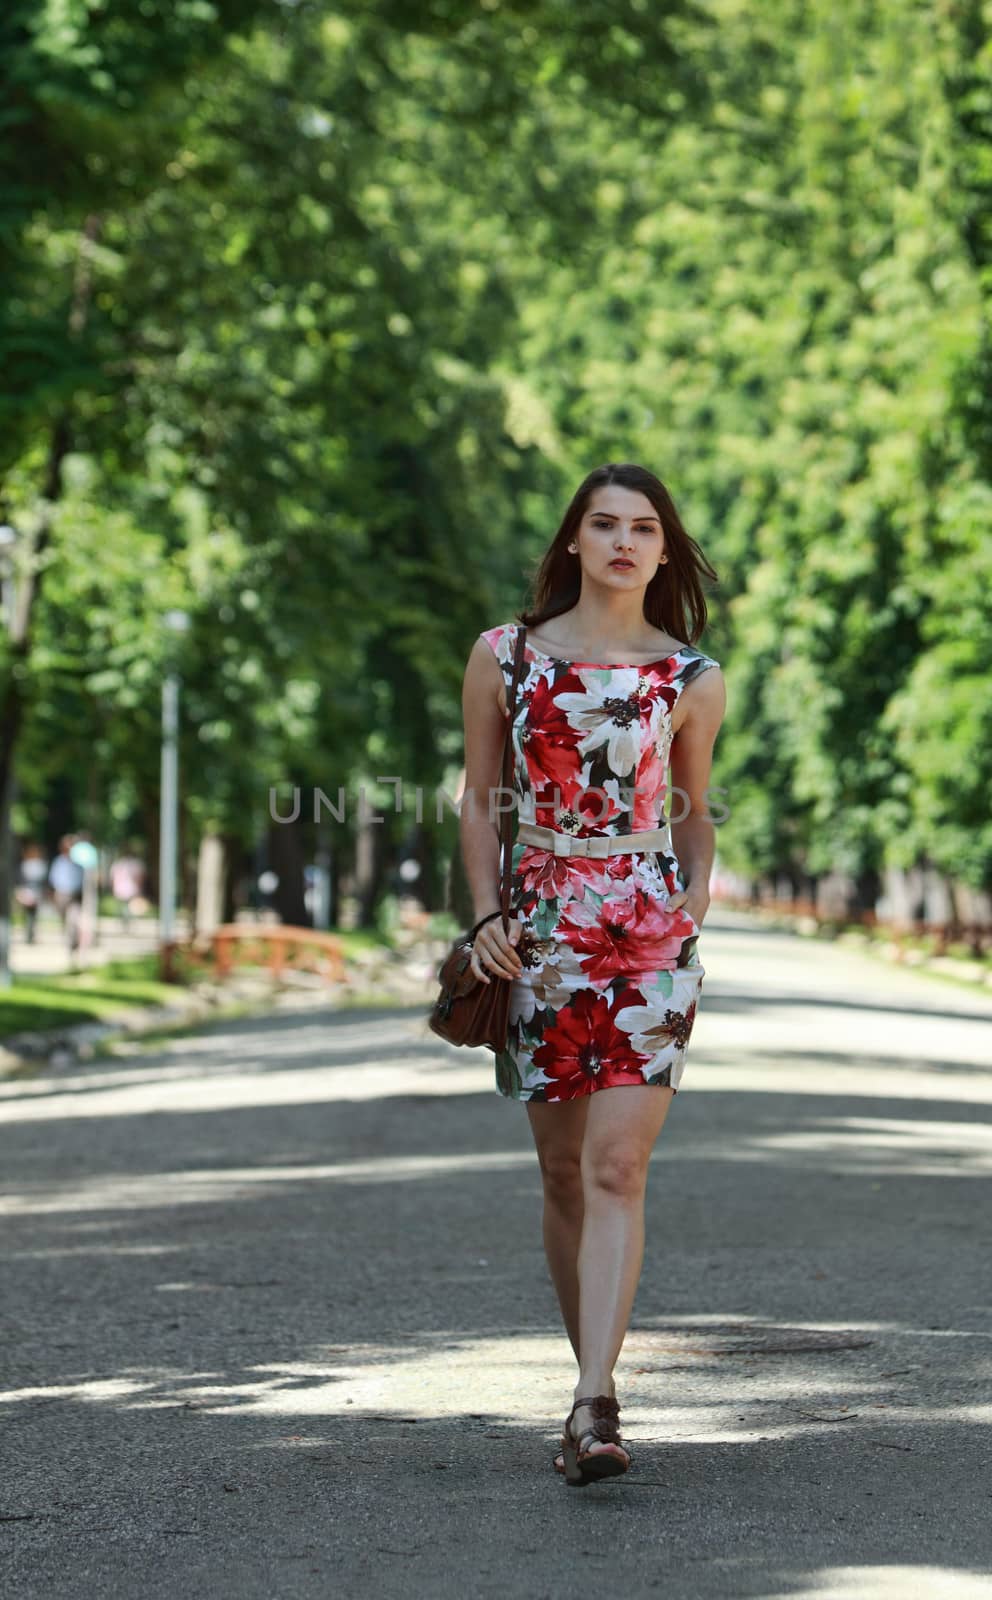 Young Woman Walking in a Park by RazvanPhotography